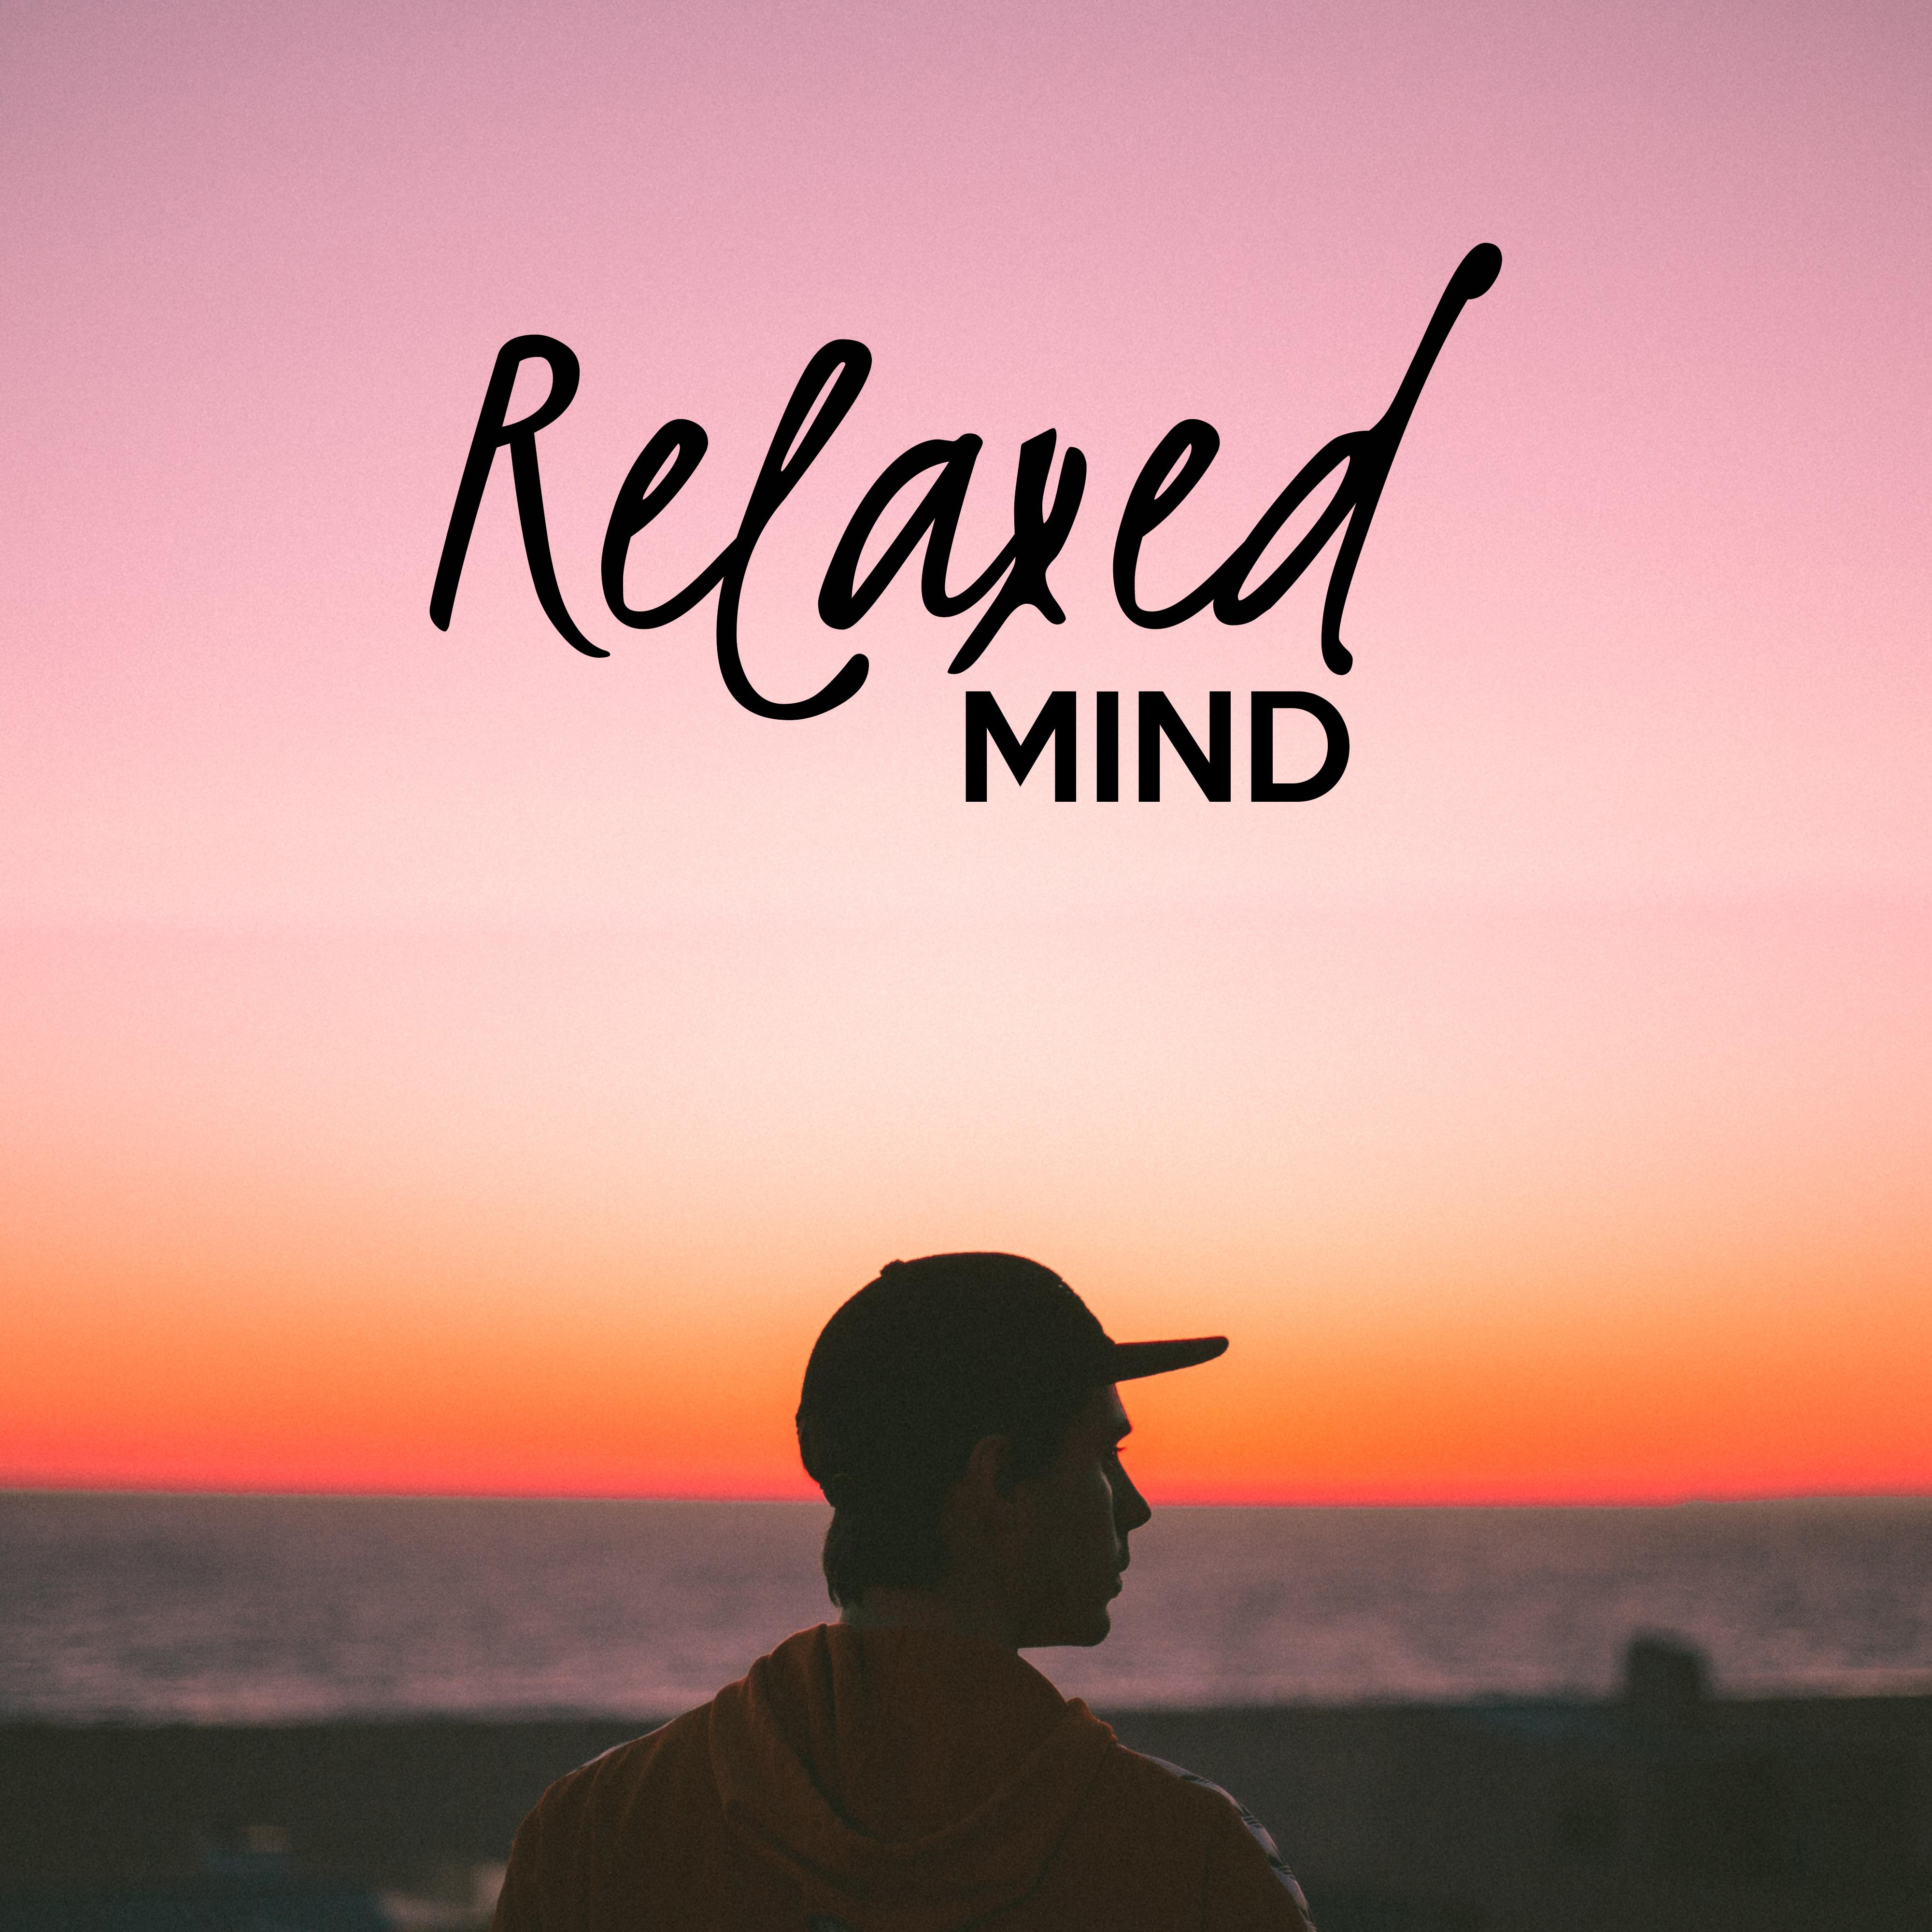 Relaxed Mind